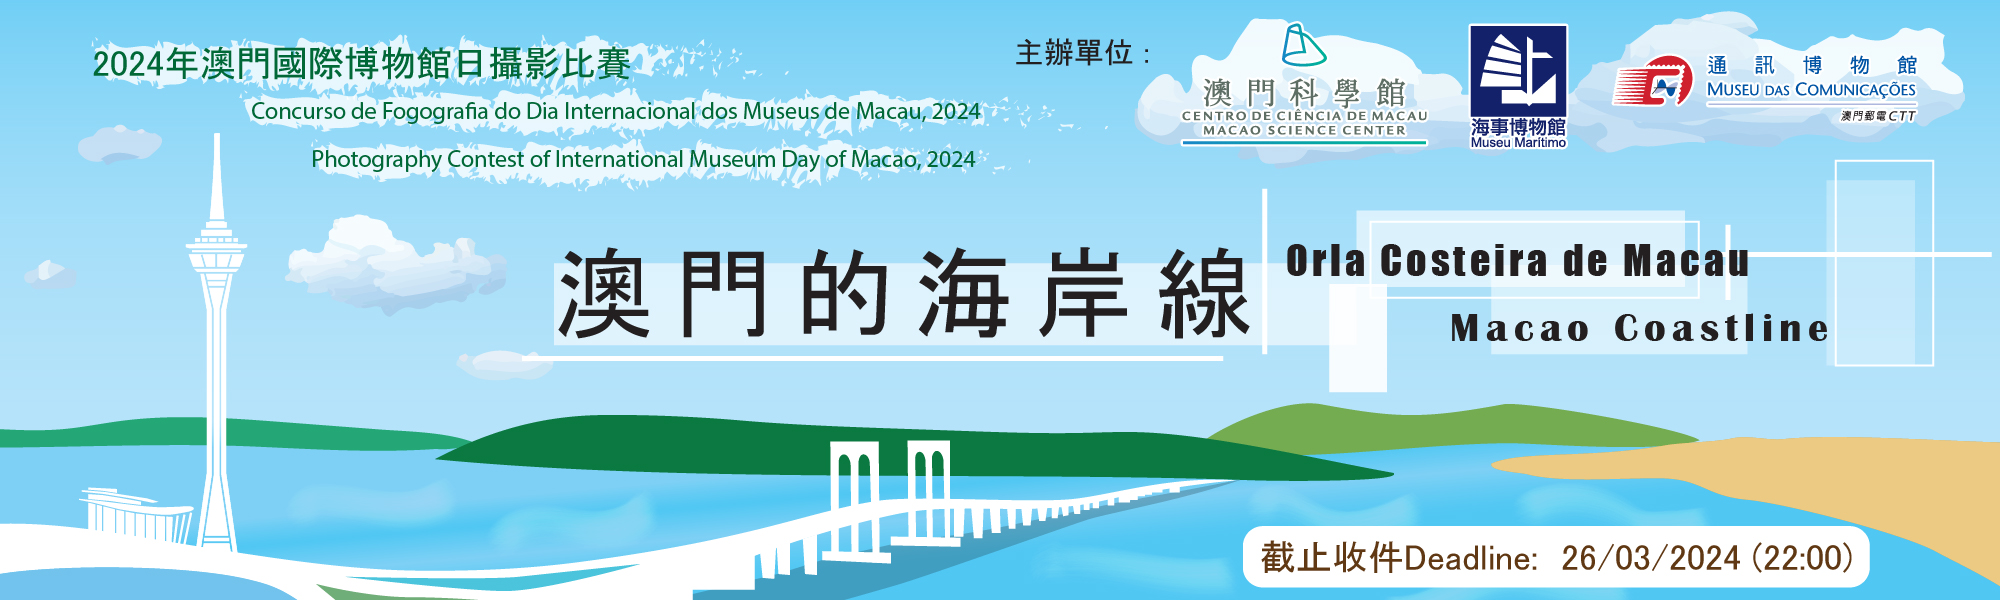 Photography Contest of International Museum Day of Macao, 2024